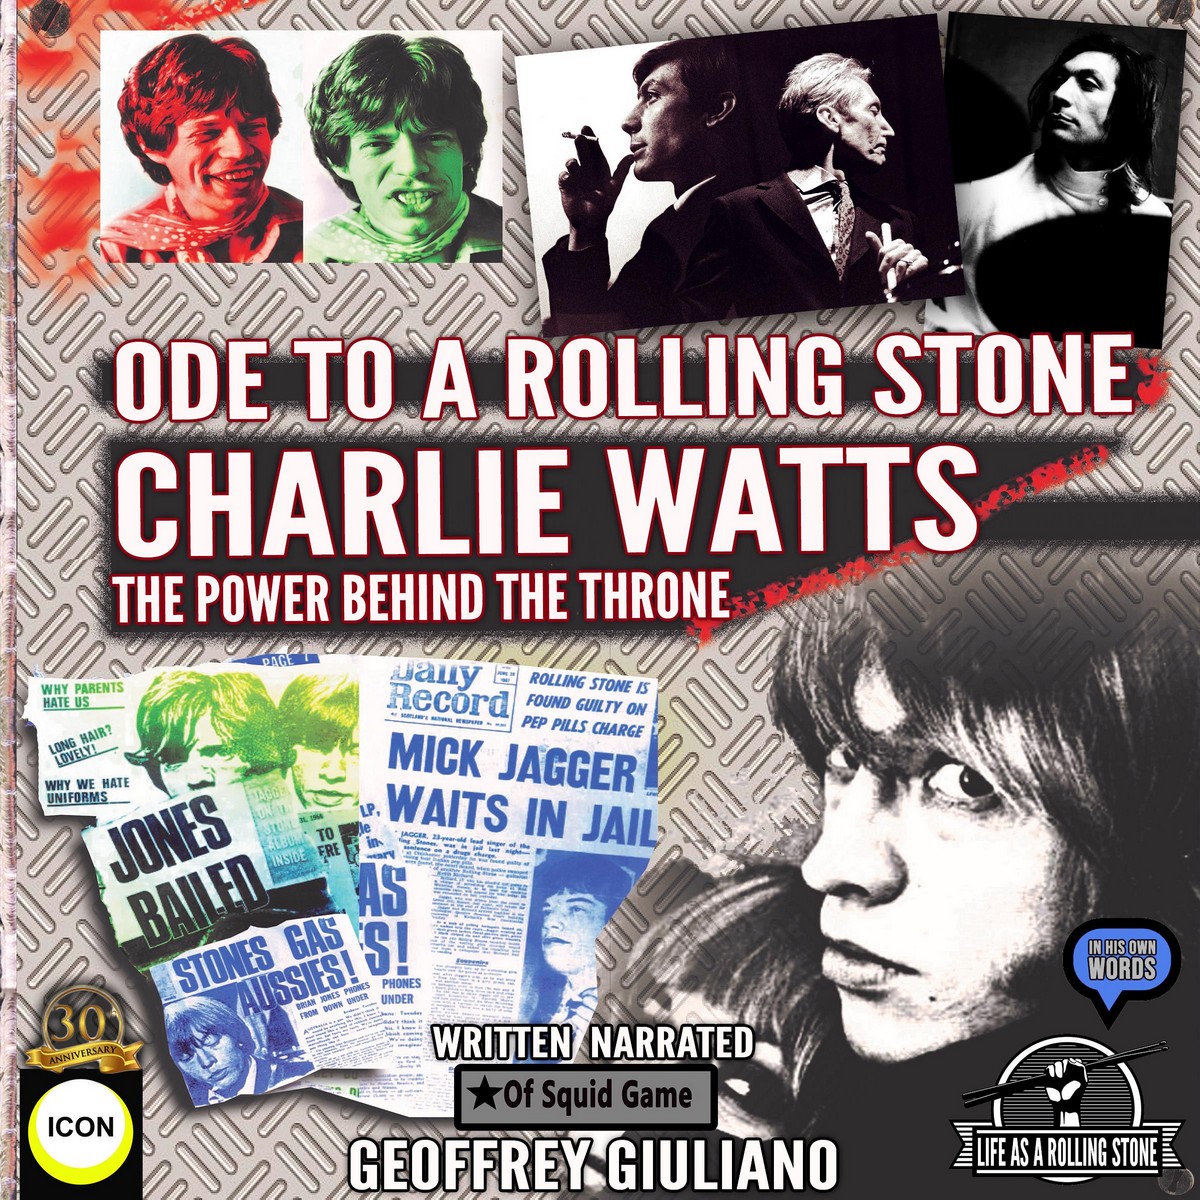 Charlie Watts Ode To A Rolling Stone – The Power Behind The Throne